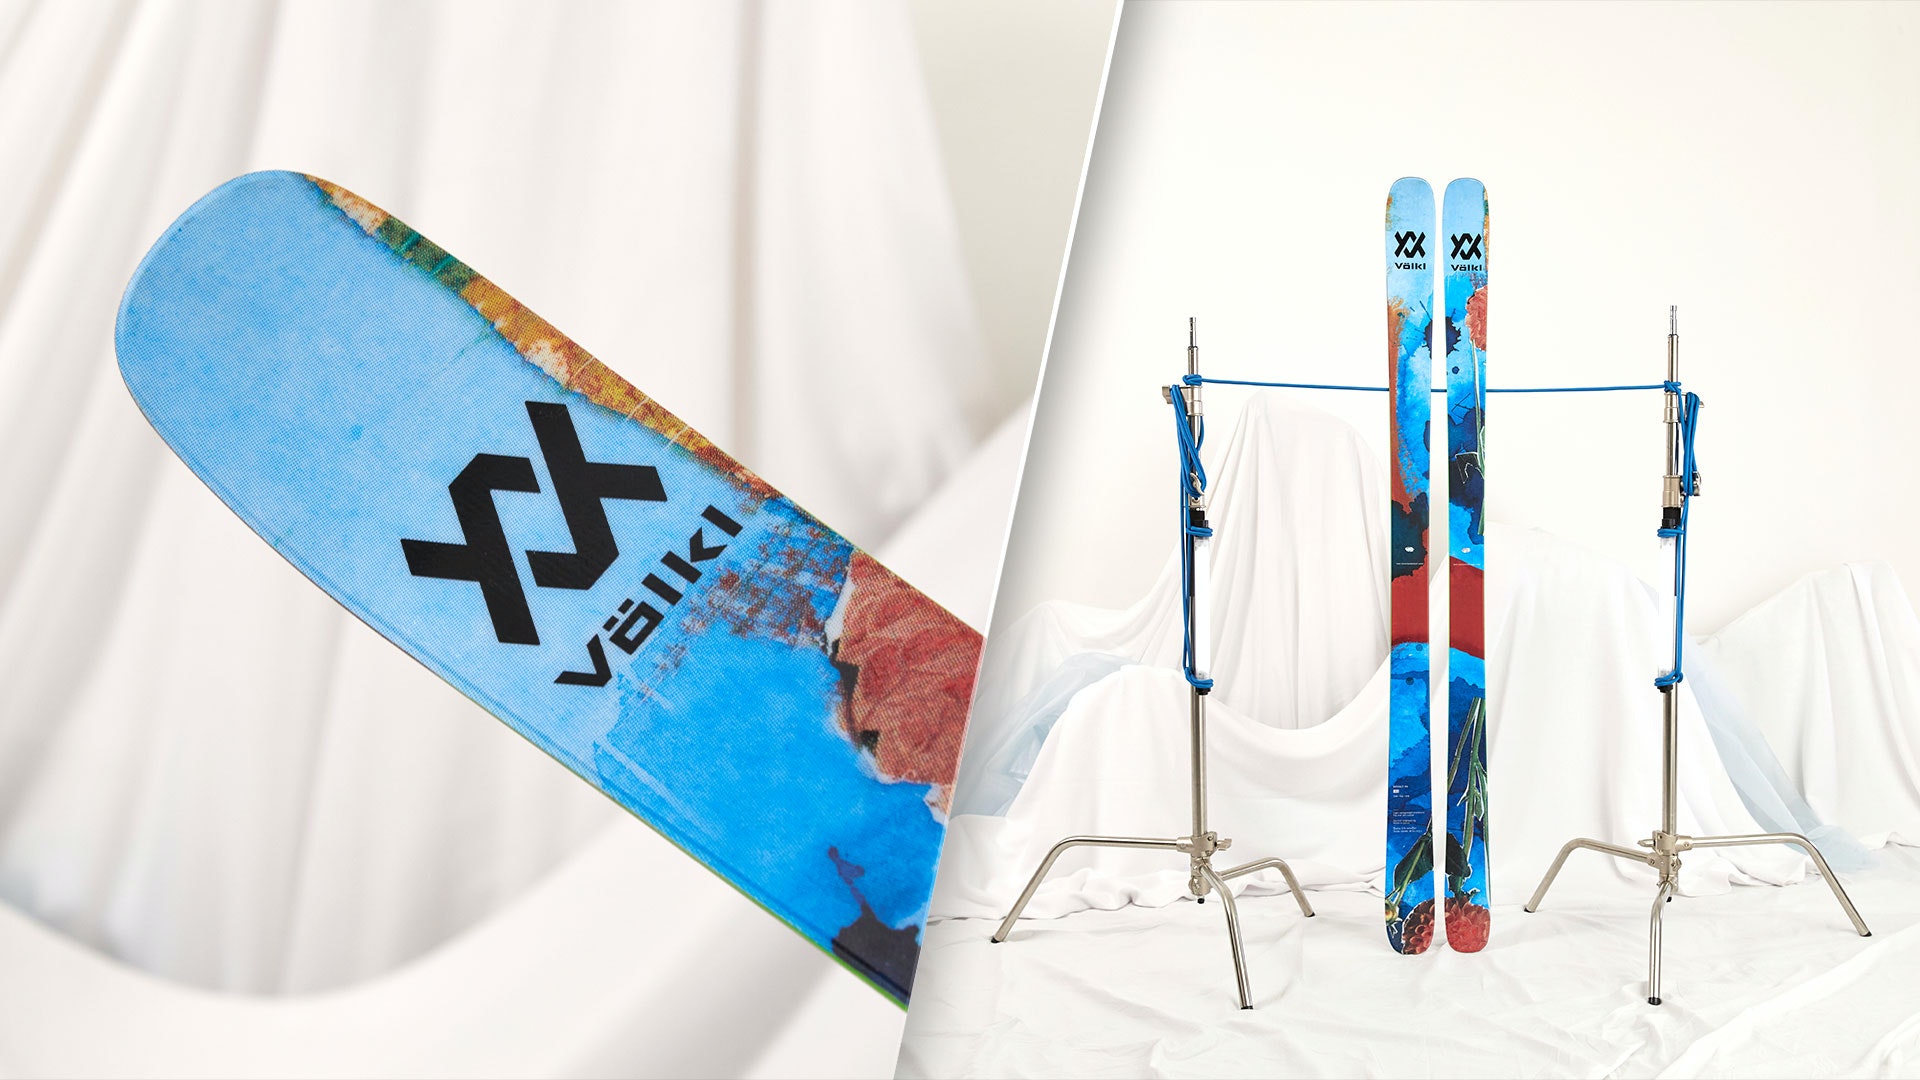 Best Freestyle Skis For 2022-2023 | Durable And Playful Skis Built To Lap The Park